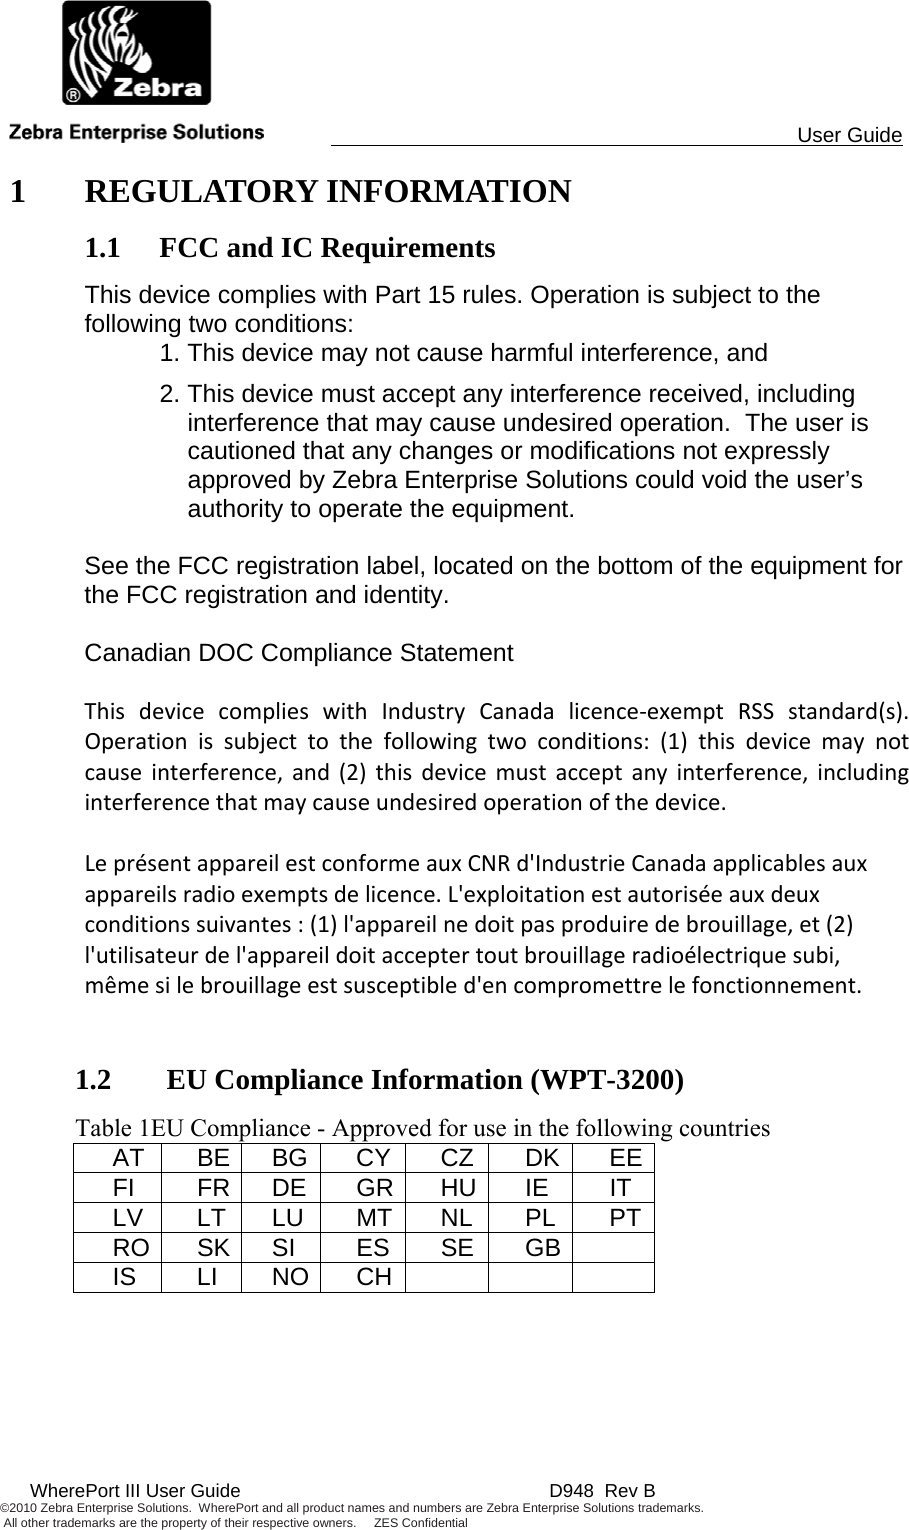                                                                                                 User Guide  WherePort III User Guide    D948  Rev B ©2010 Zebra Enterprise Solutions.  WherePort and all product names and numbers are Zebra Enterprise Solutions trademarks.  All other trademarks are the property of their respective owners.     ZES Confidential     1 REGULATORY INFORMATION 1.1 FCC and IC Requirements This device complies with Part 15 rules. Operation is subject to the following two conditions:   1. This device may not cause harmful interference, and 2. This device must accept any interference received, including interference that may cause undesired operation.  The user is cautioned that any changes or modifications not expressly approved by Zebra Enterprise Solutions could void the user’s authority to operate the equipment.   See the FCC registration label, located on the bottom of the equipment for the FCC registration and identity.  Canadian DOC Compliance Statement  ThisdevicecomplieswithIndustryCanadalicence‐exemptRSSstandard(s).Operationissubjecttothefollowingtwoconditions:(1)thisdevicemaynotcauseinterference,and(2)thisdevicemustacceptanyinterference,includinginterferencethatmaycauseundesiredoperationofthedevice.LeprésentappareilestconformeauxCNRd&apos;IndustrieCanadaapplicablesauxappareilsradioexemptsdelicence.L&apos;exploitationestautoriséeauxdeuxconditionssuivantes:(1)l&apos;appareilnedoitpasproduiredebrouillage,et(2)l&apos;utilisateurdel&apos;appareildoitacceptertoutbrouillageradioélectriquesubi,mêmesilebrouillageestsusceptibled&apos;encompromettrelefonctionnement.  1.2  EU Compliance Information (WPT-3200) Table 1EU Compliance - Approved for use in the following countries AT BE BG CY CZ DK EEFI FR DE GR HU IE IT LV LT LU MT NL PL PTRO SK SI  ES  SE GB  IS LI NO CH     